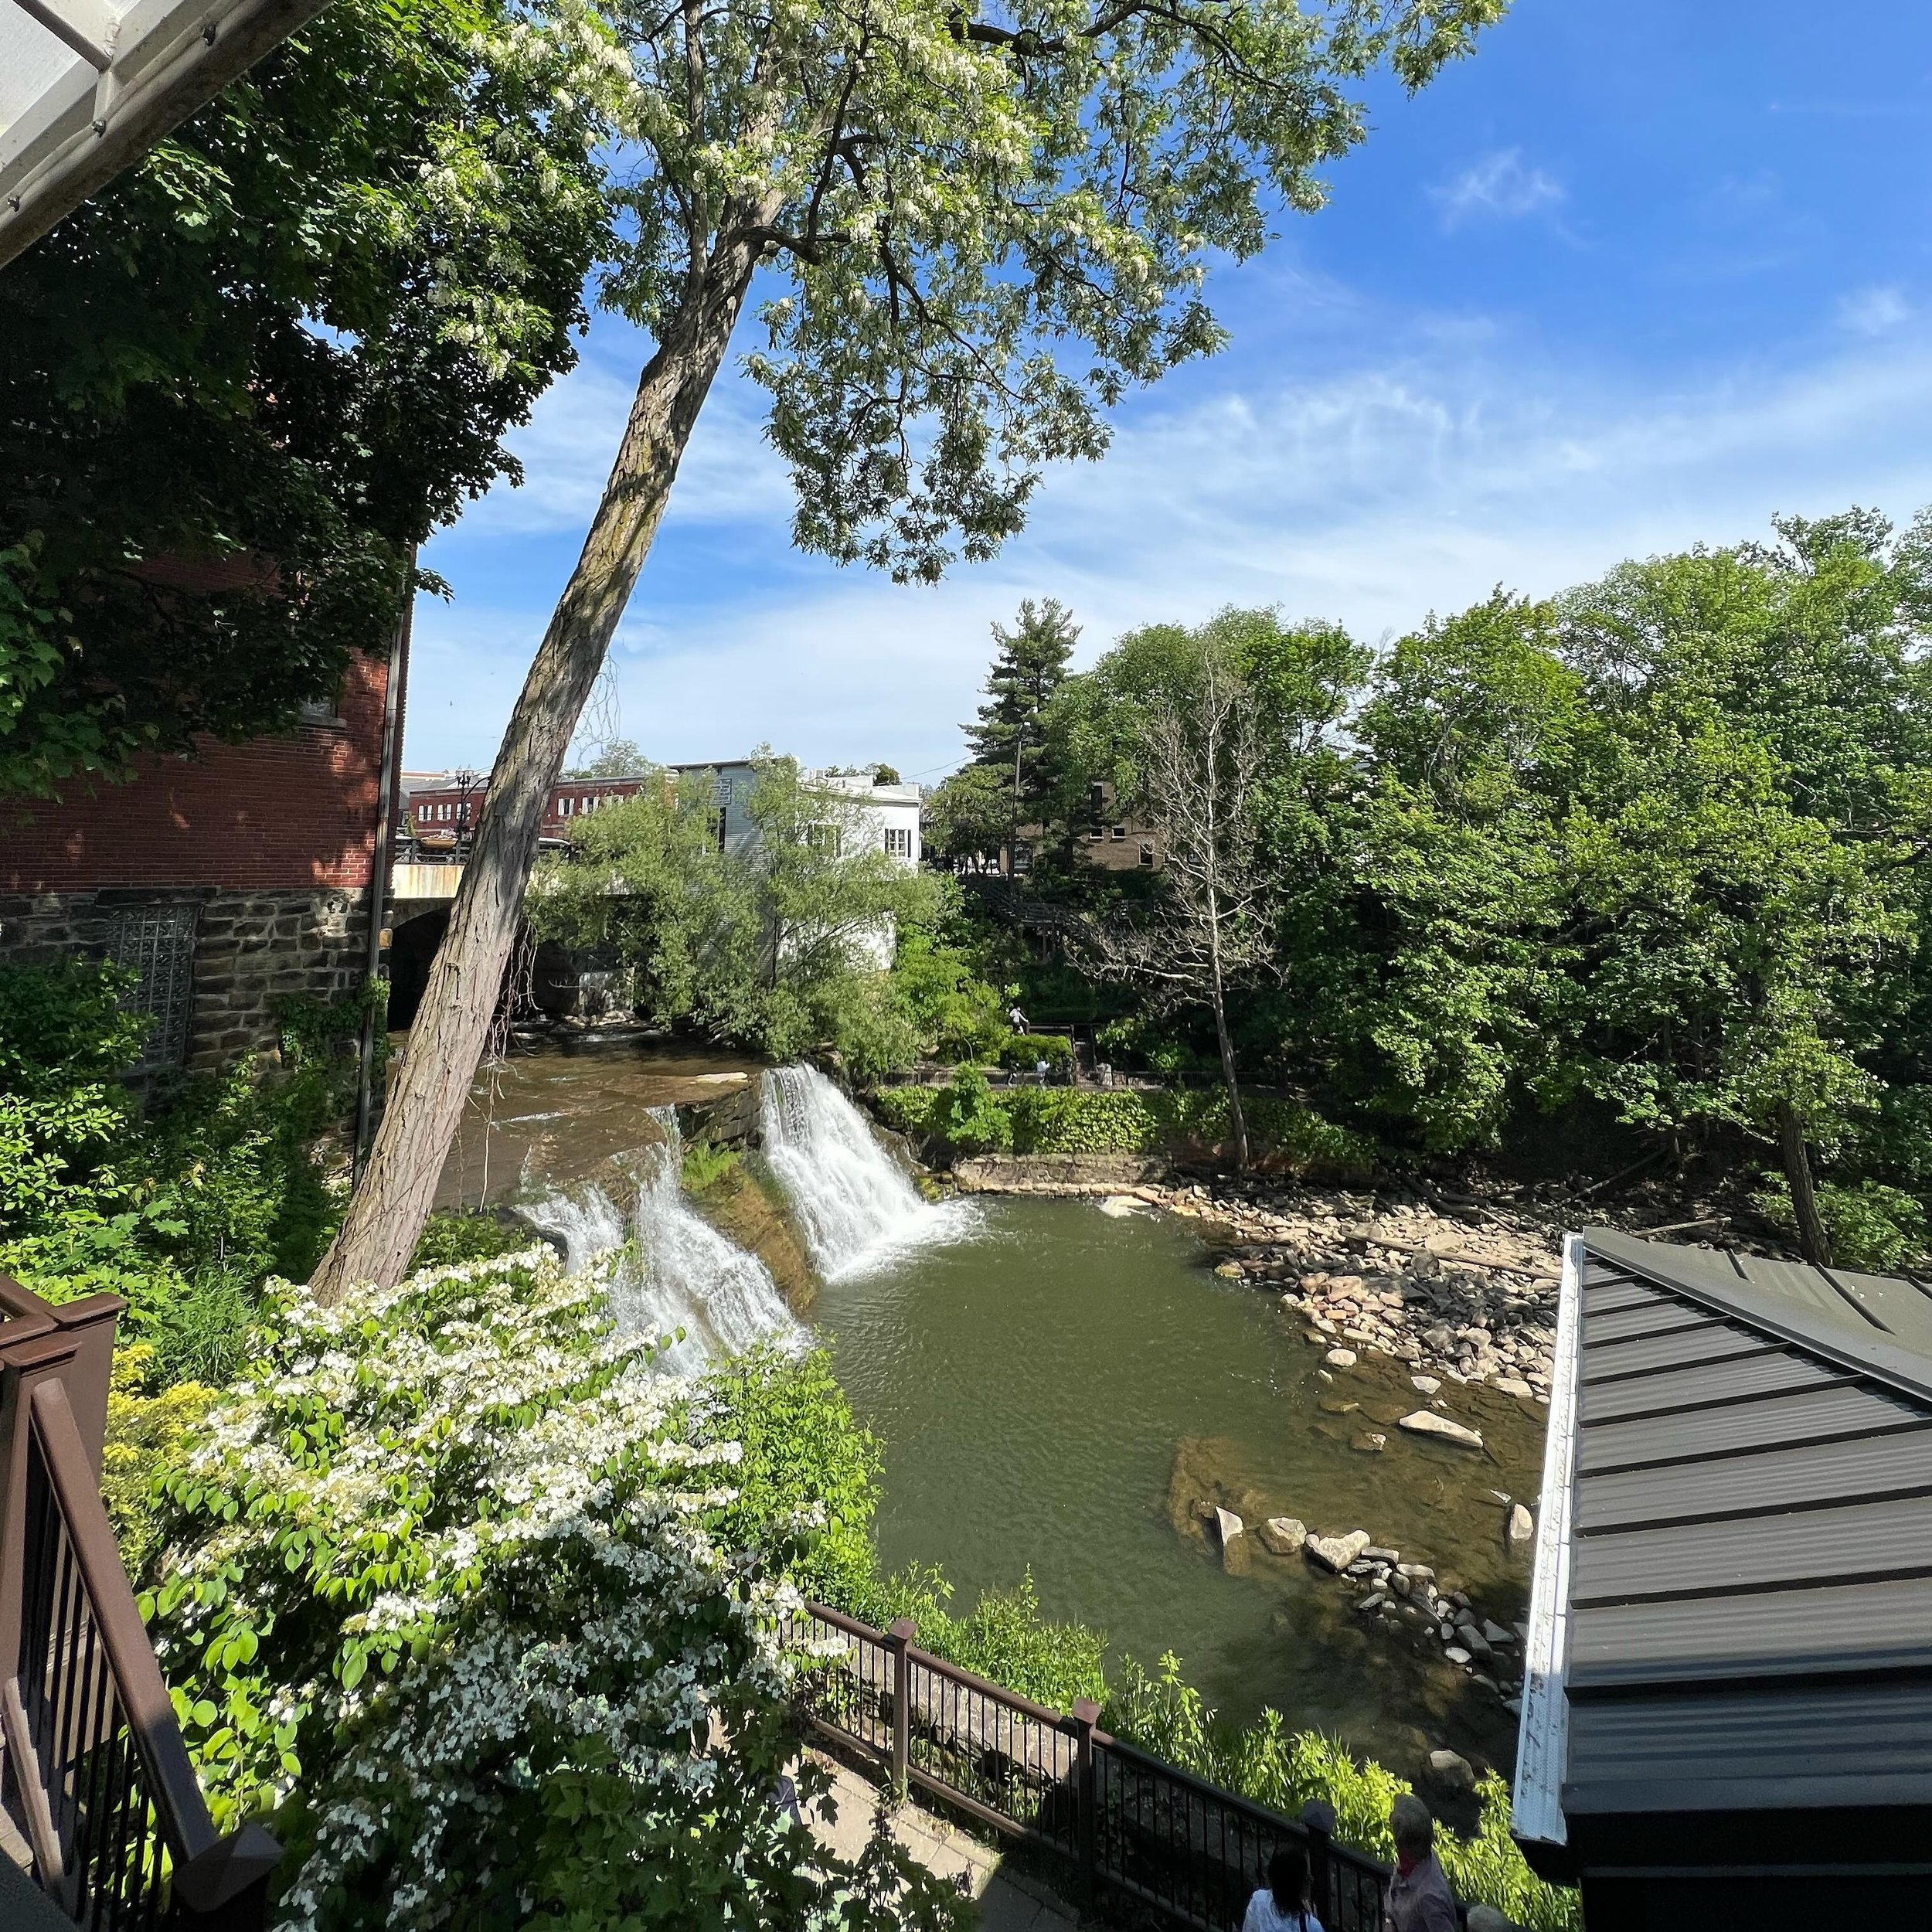 It&rsquo;s a beautiful day in Chagrin Falls&hellip; so don&rsquo;t forget to stop by some of our favorite local shops after your appointment! We have a surprise coming soon to help you discover more of all the wonderful small businesses in downtown C